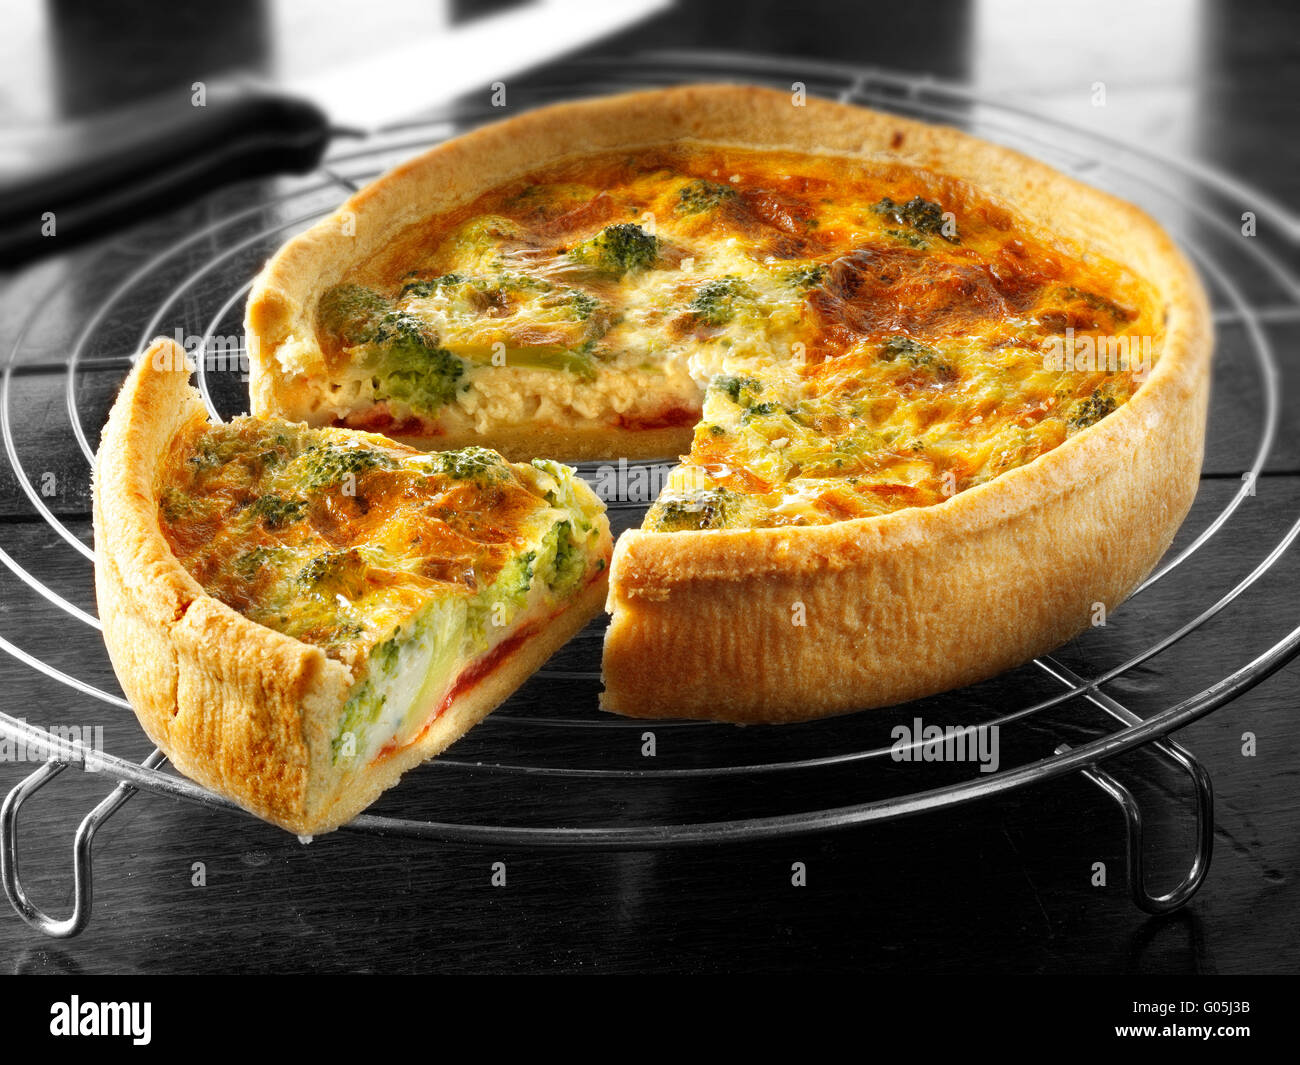 Whole cooked brocoli quiche with a slice out Stock Photo